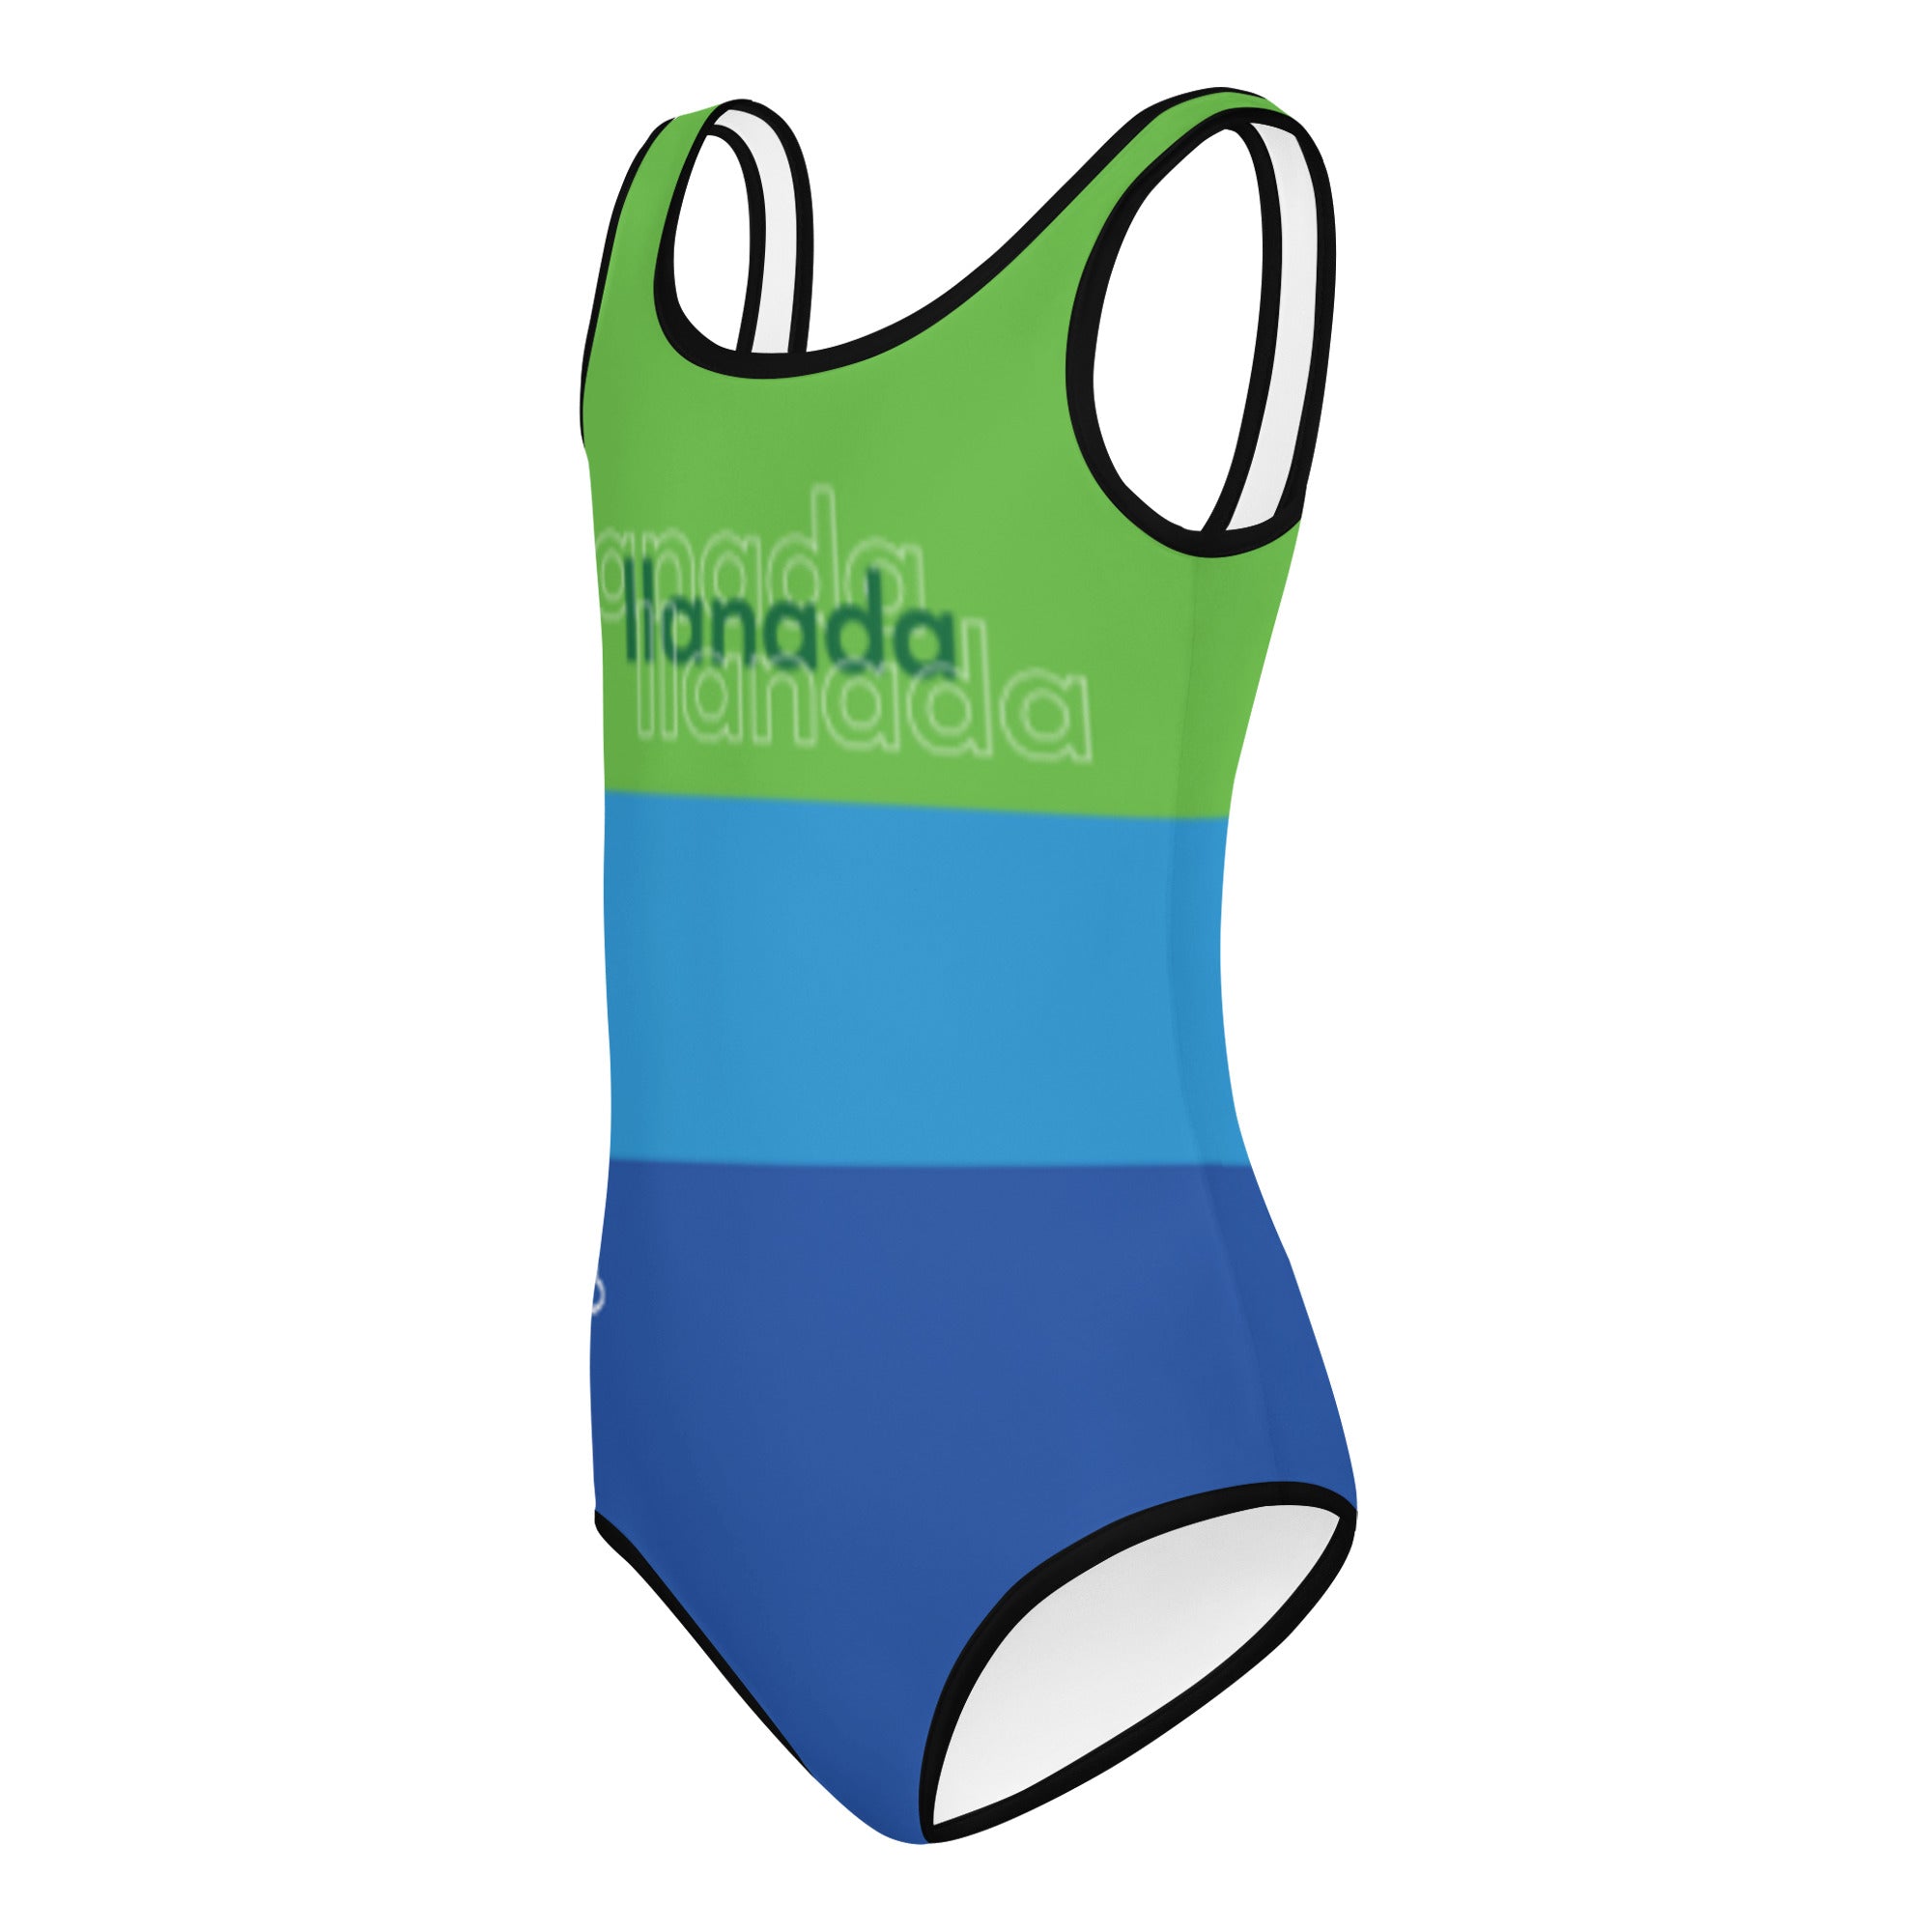 Small Campers Tri-Color Llanada Swimsuit